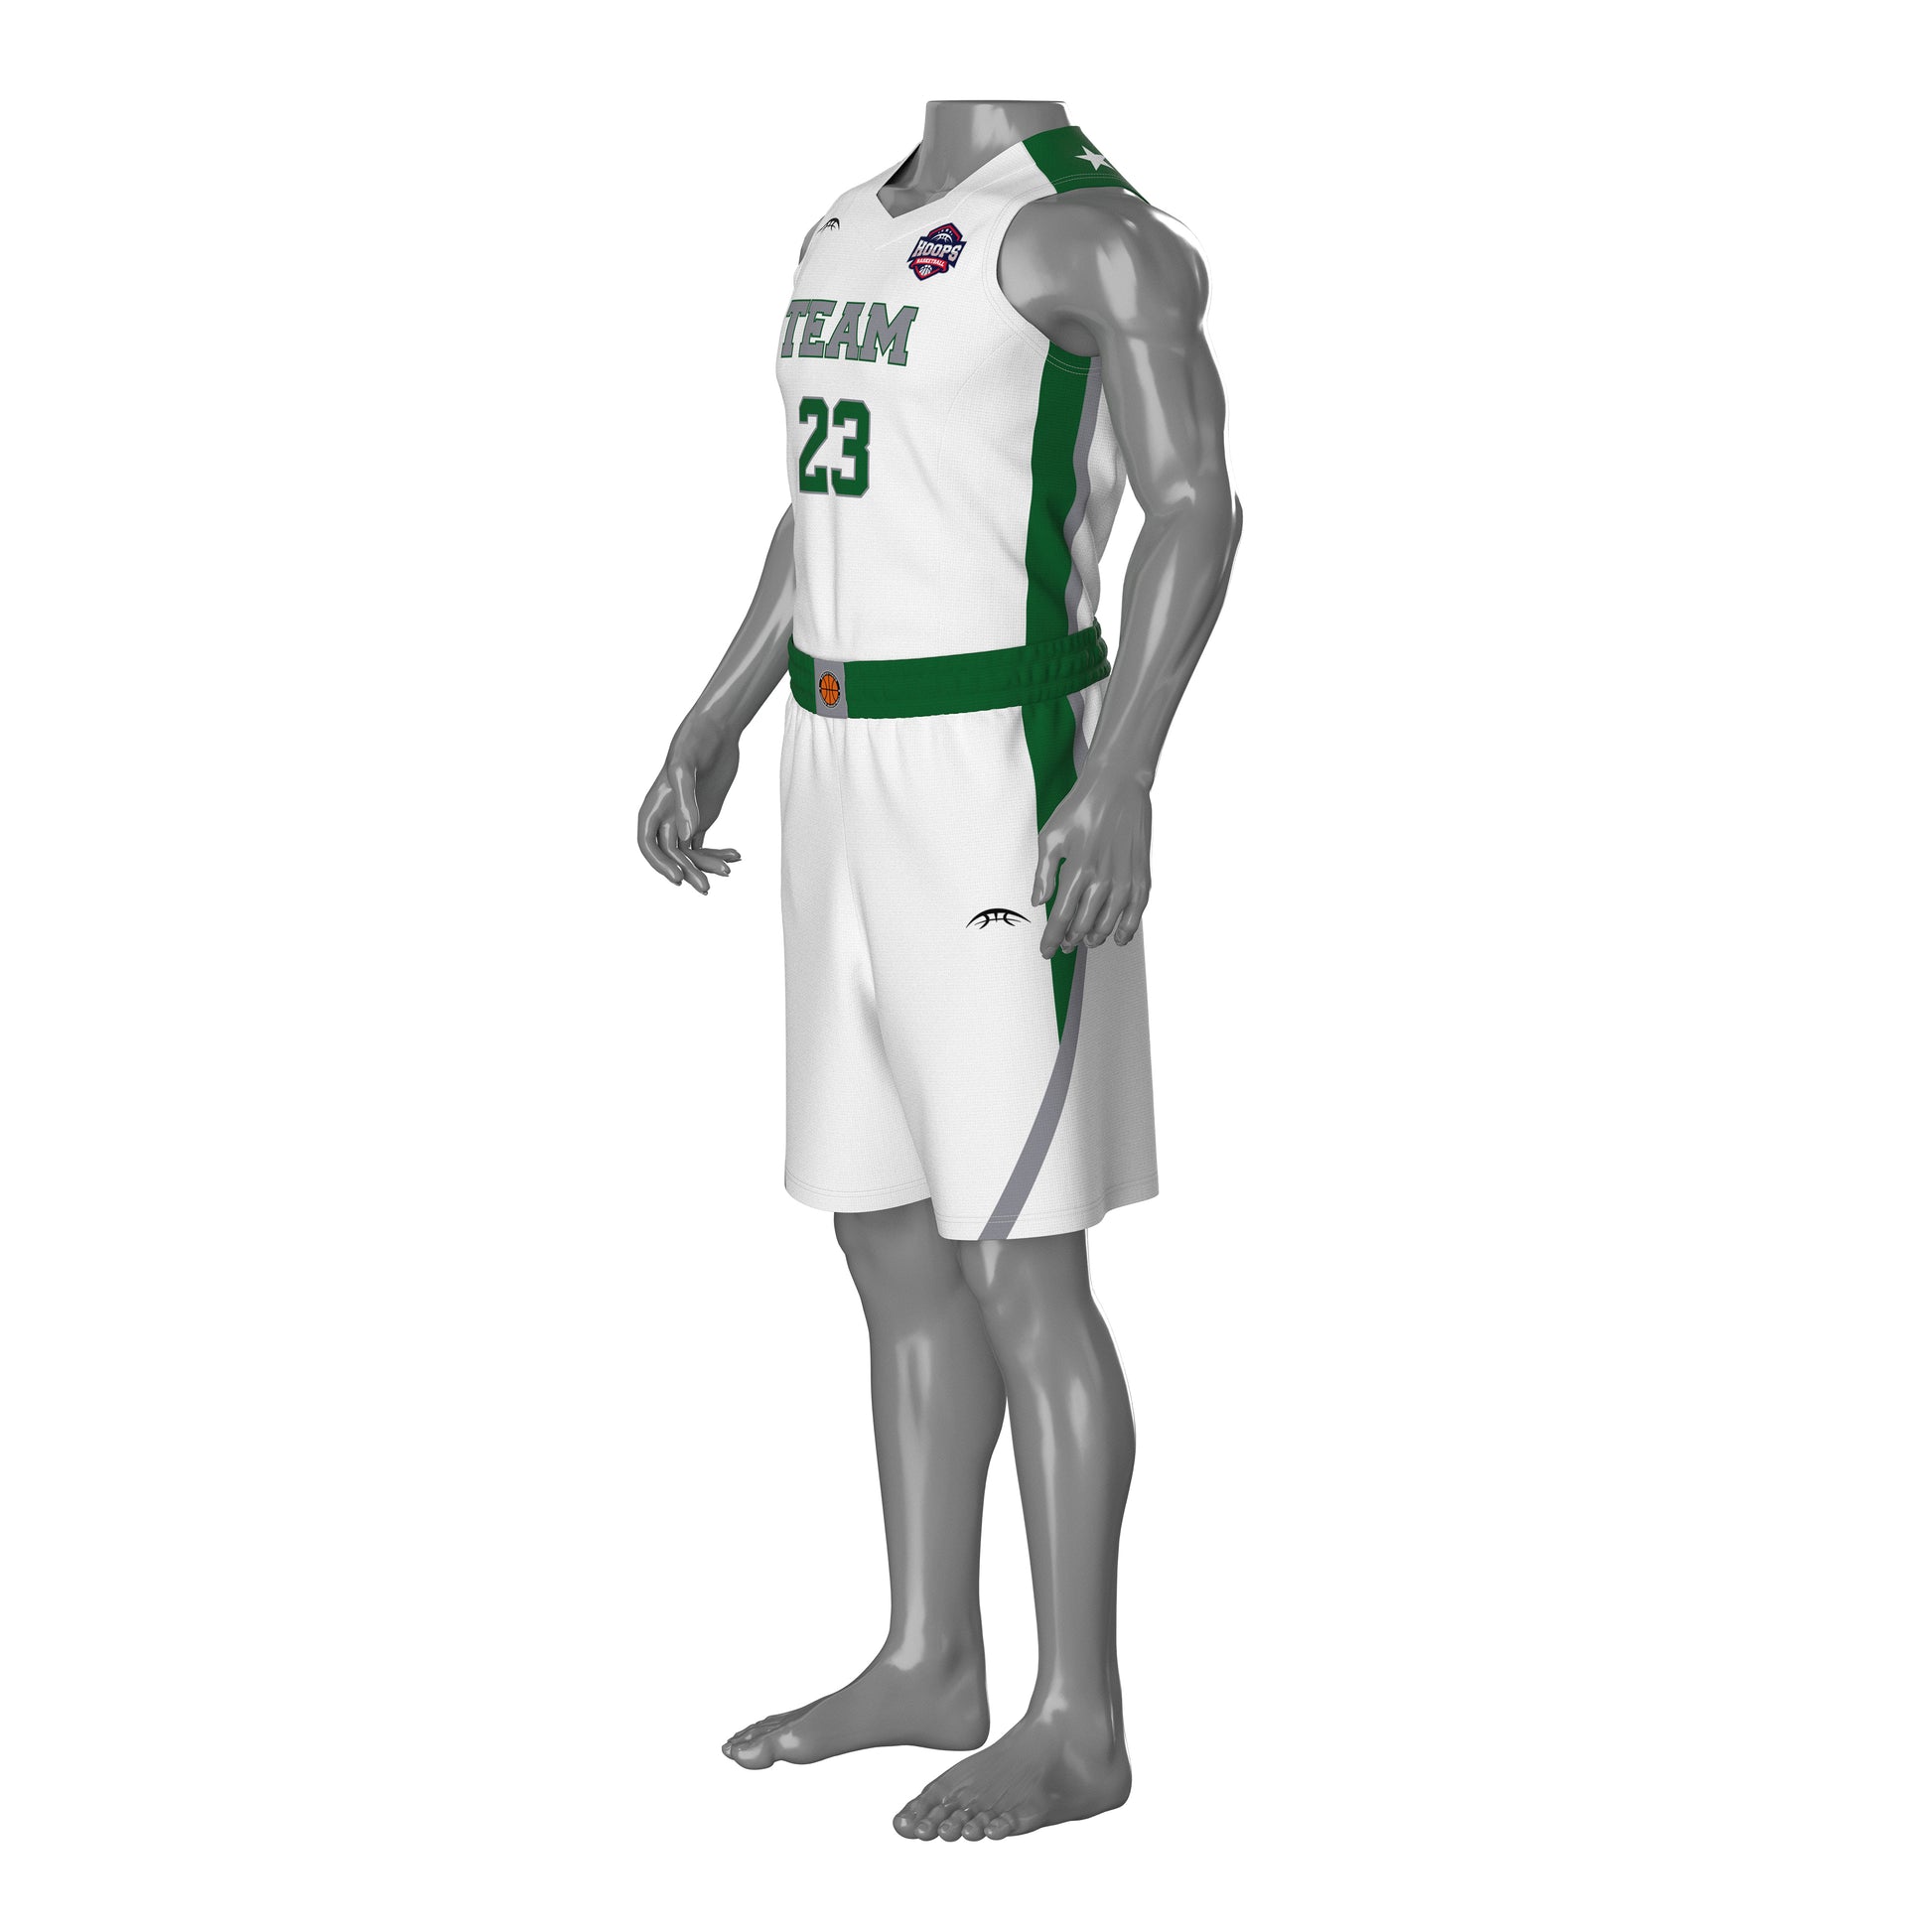 BASKETBALL BOSTON 20 JERSEY FREE CUSTOMIZE OF NAME AND NUMBER ONLY full  sublimation high quality fabrics/ trending jersey